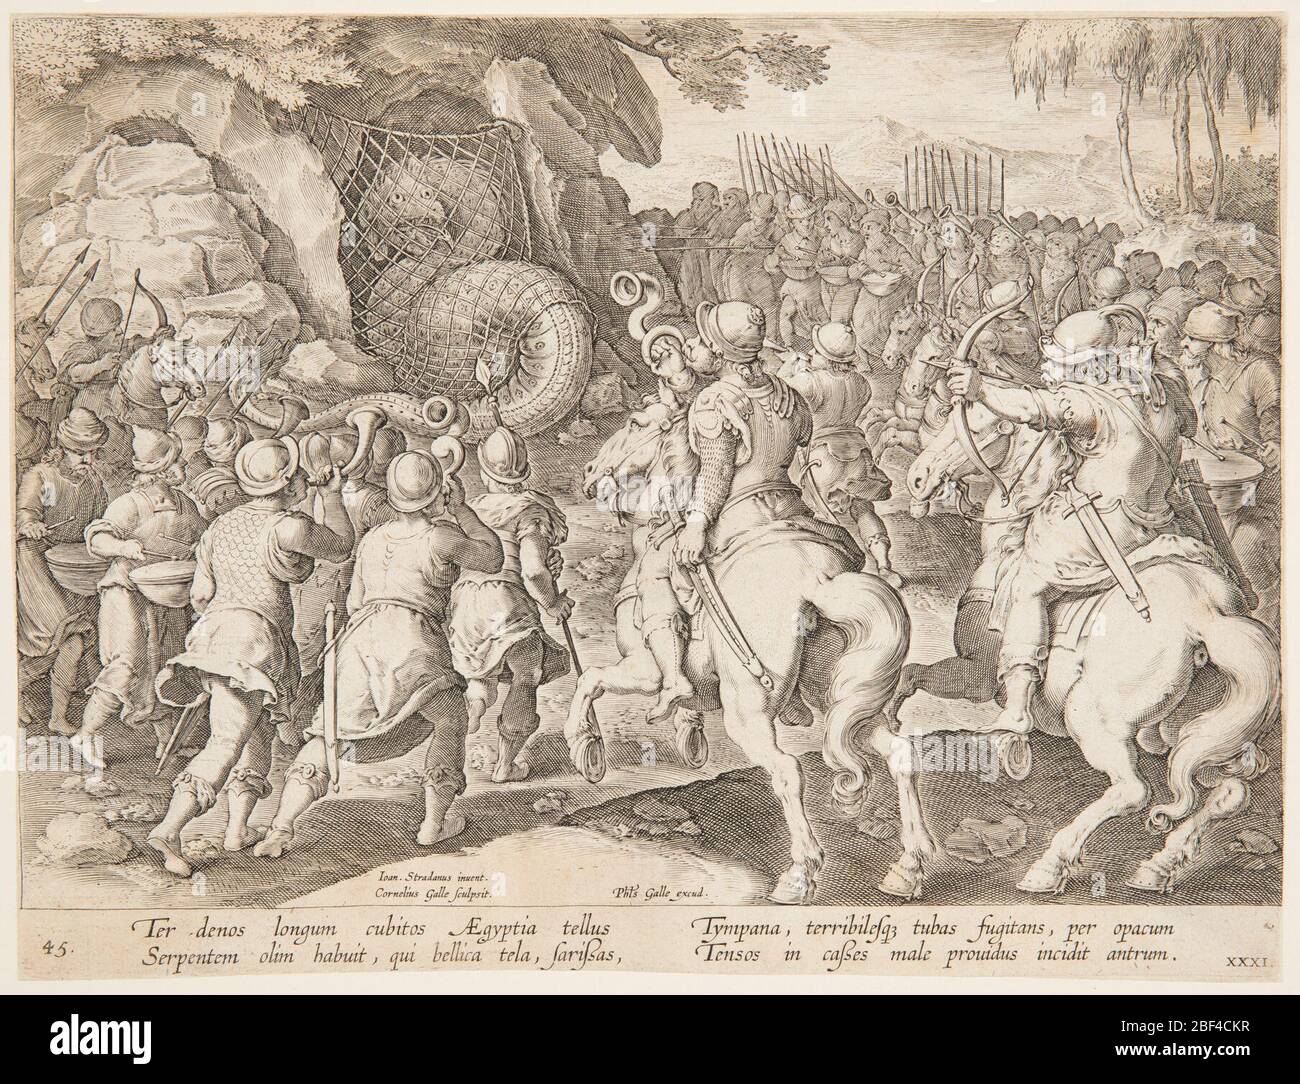 Trapping the serpent. Horizontal rectangle. A large serpent is trapped at the entrance of a cave, a net blocking the entrance. Foot-soldiers and cavalrymen, blowing trumpets and beating drums, surround the cave. Near left center: 'IOAN. STRADANUS INVENT. Stock Photo